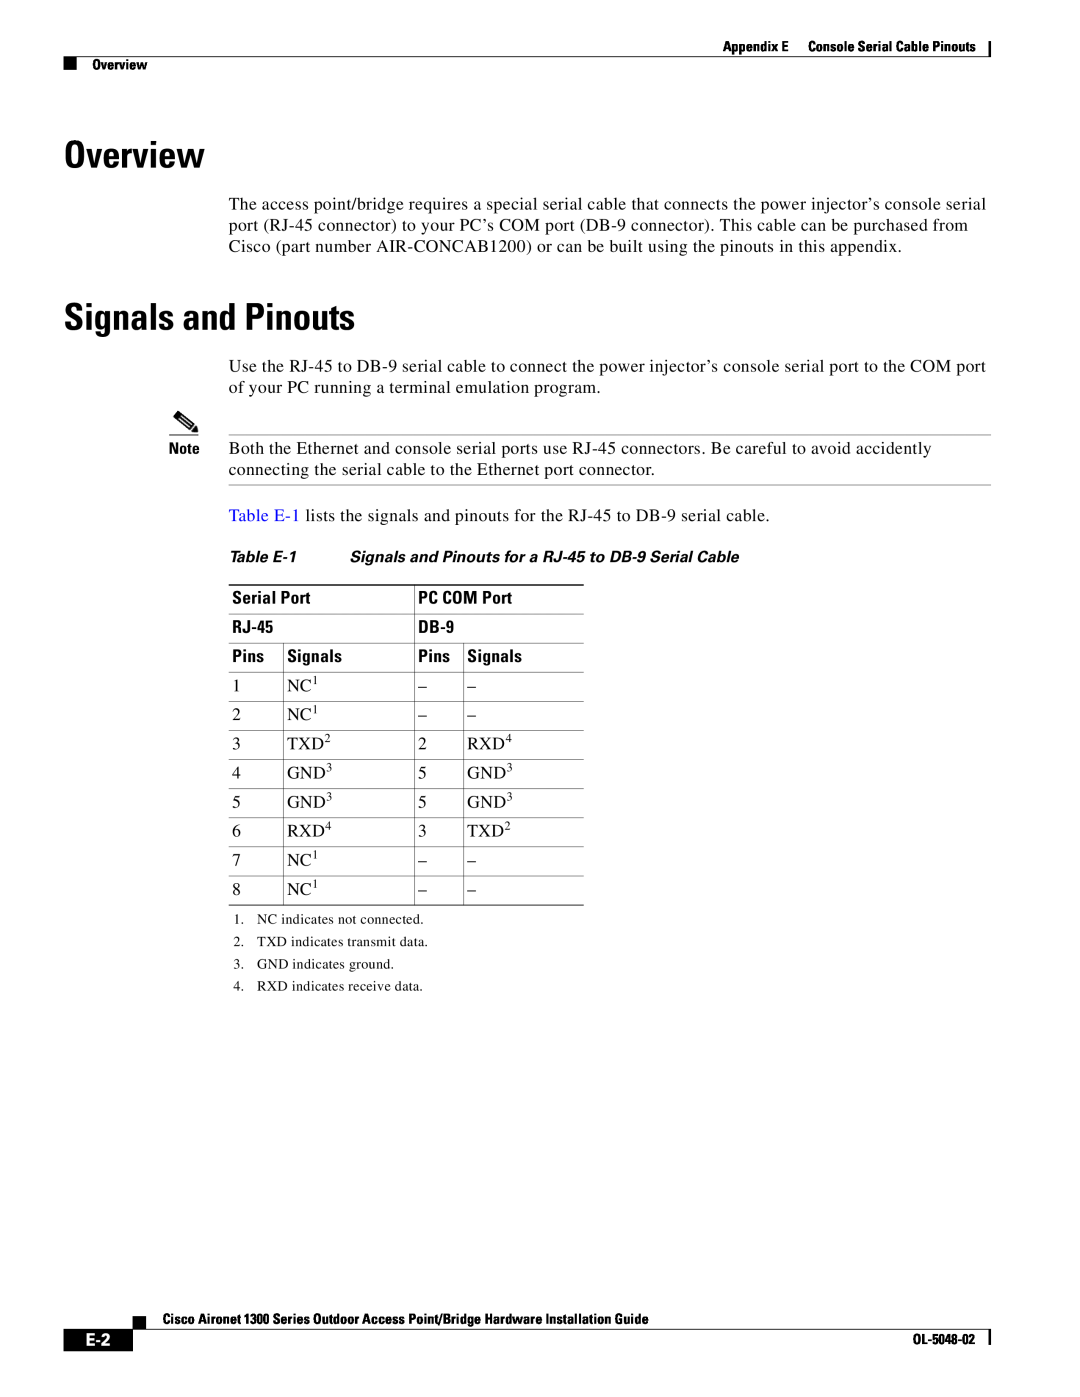 Cisco Systems 1300 Series manual Overview, Signals and Pinouts 